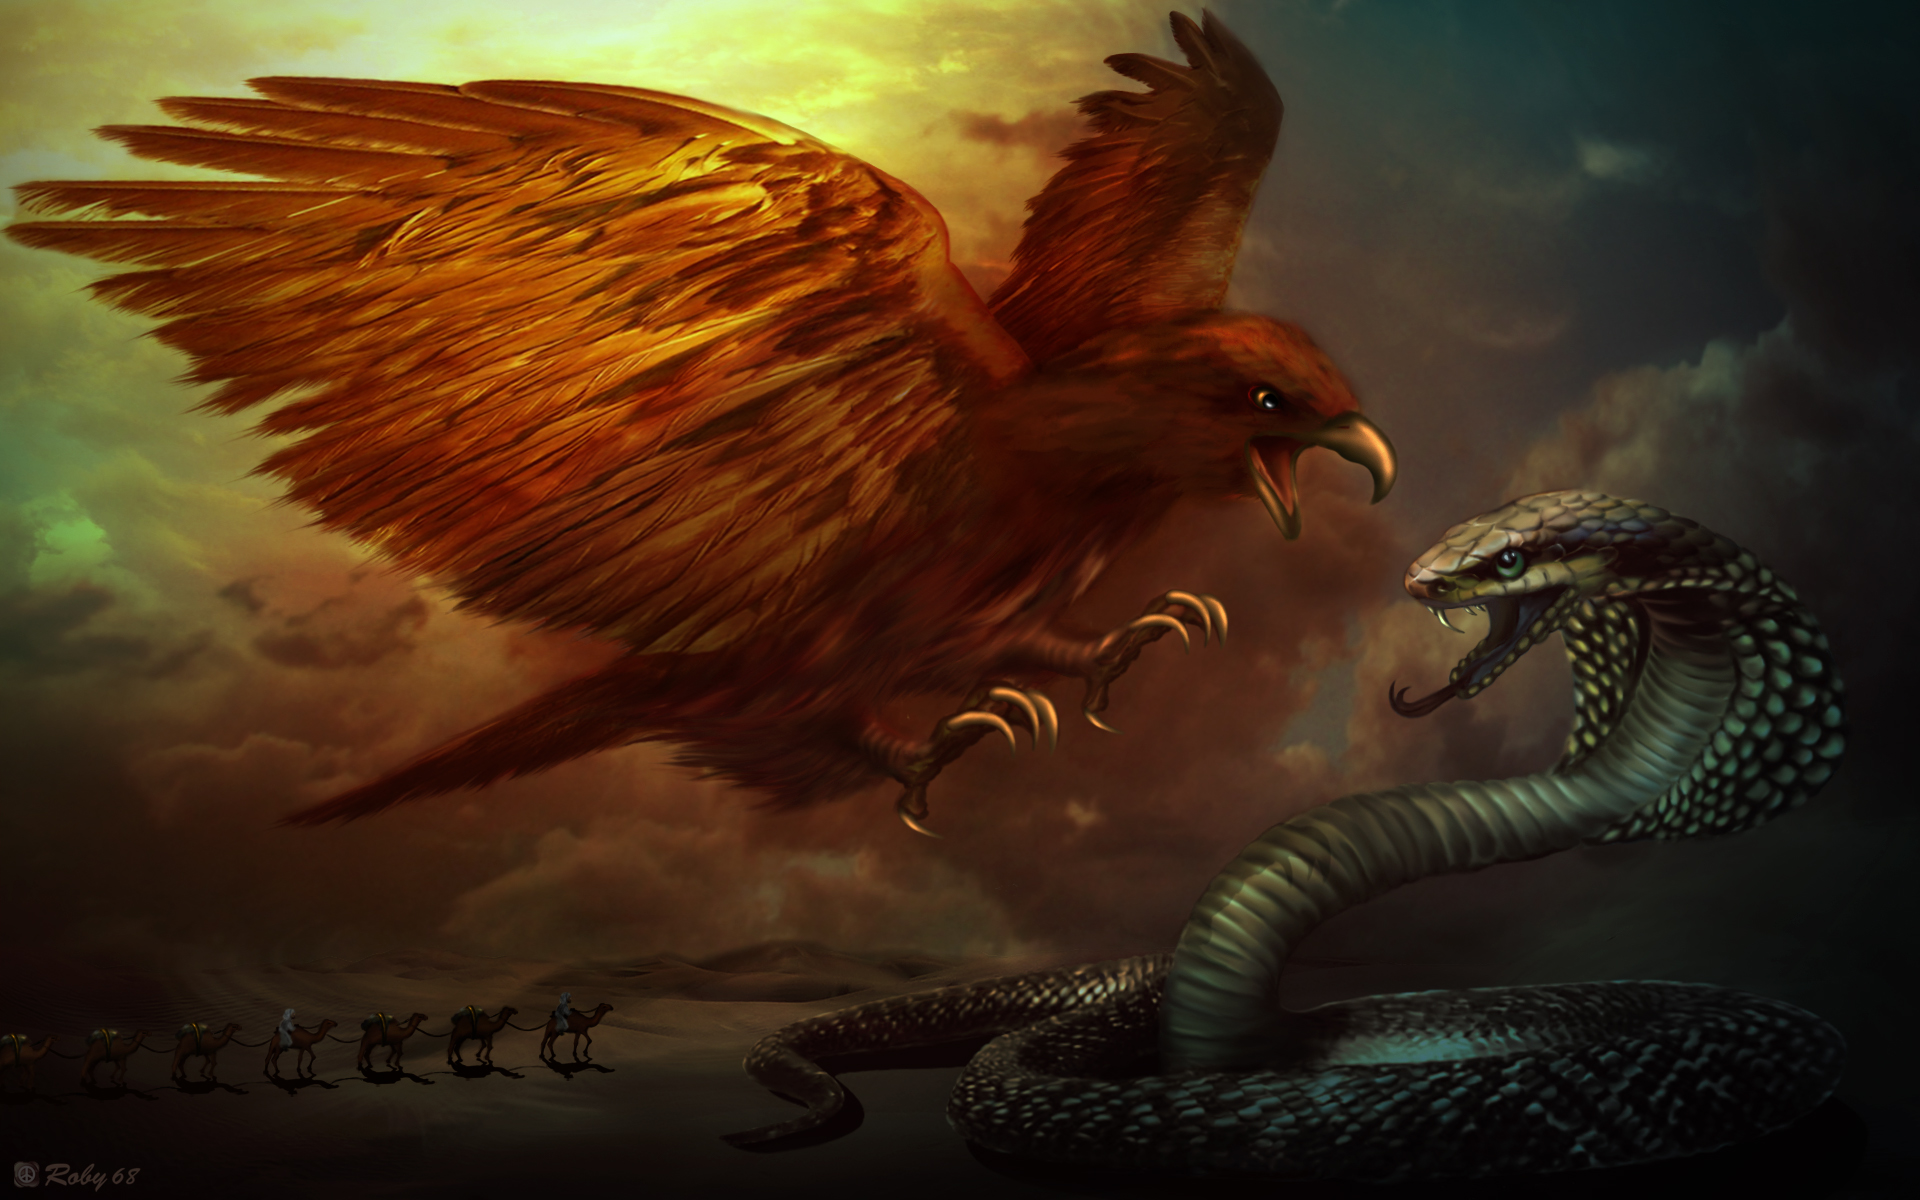 Epic Mythical Creatures Battles